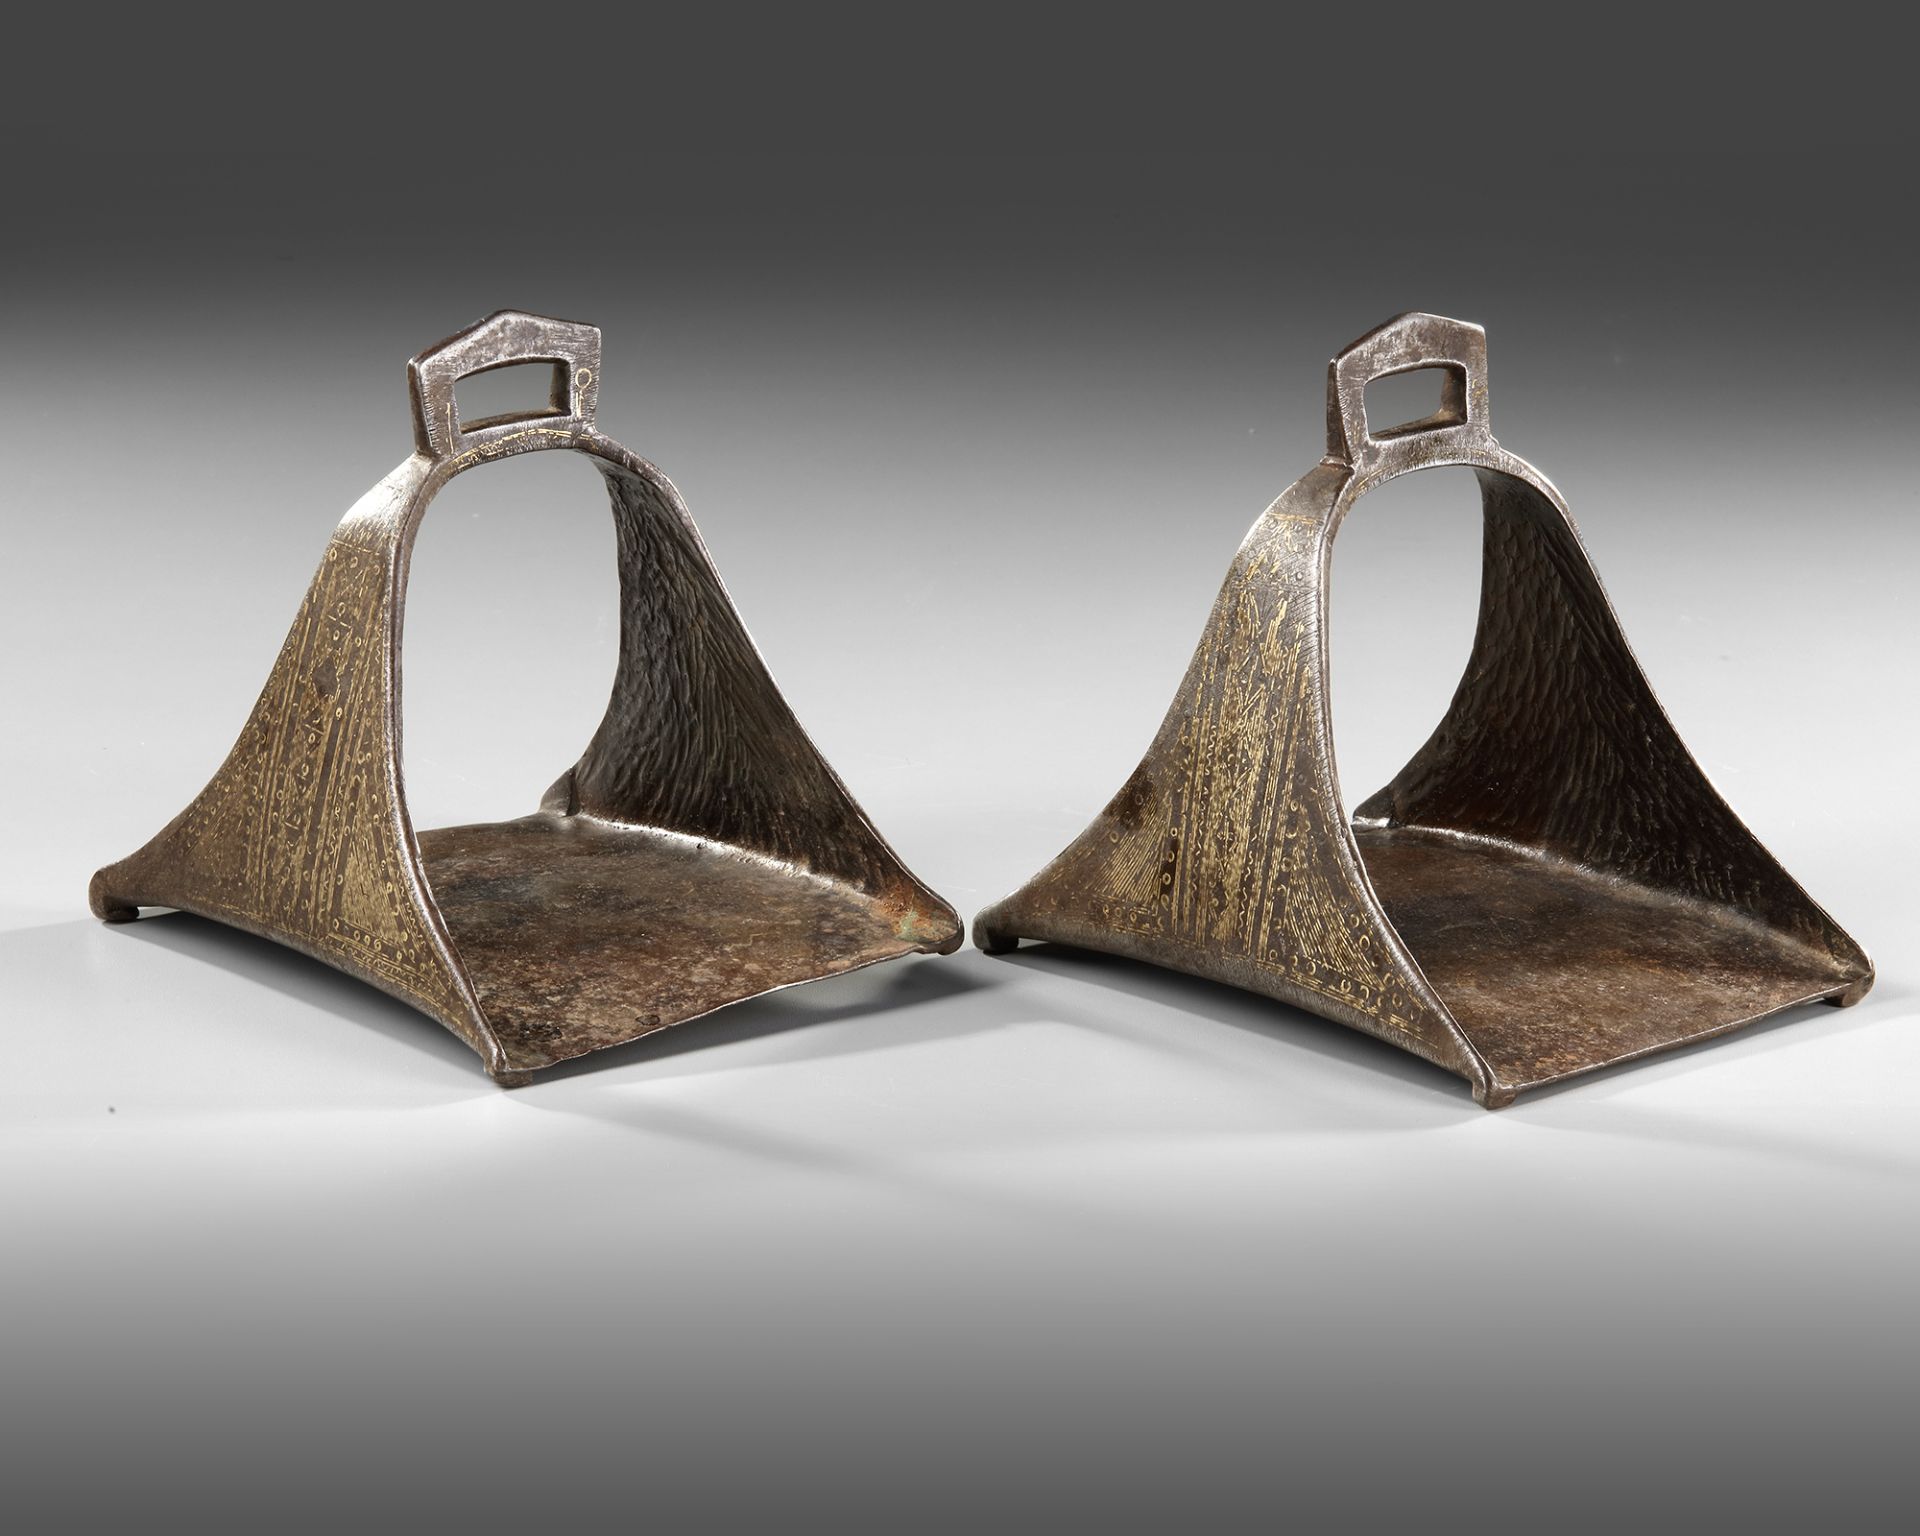 A PAIR OF STEEL STIRRUPS, NORTH AFRICA, 19TH CENTURY - Image 4 of 6